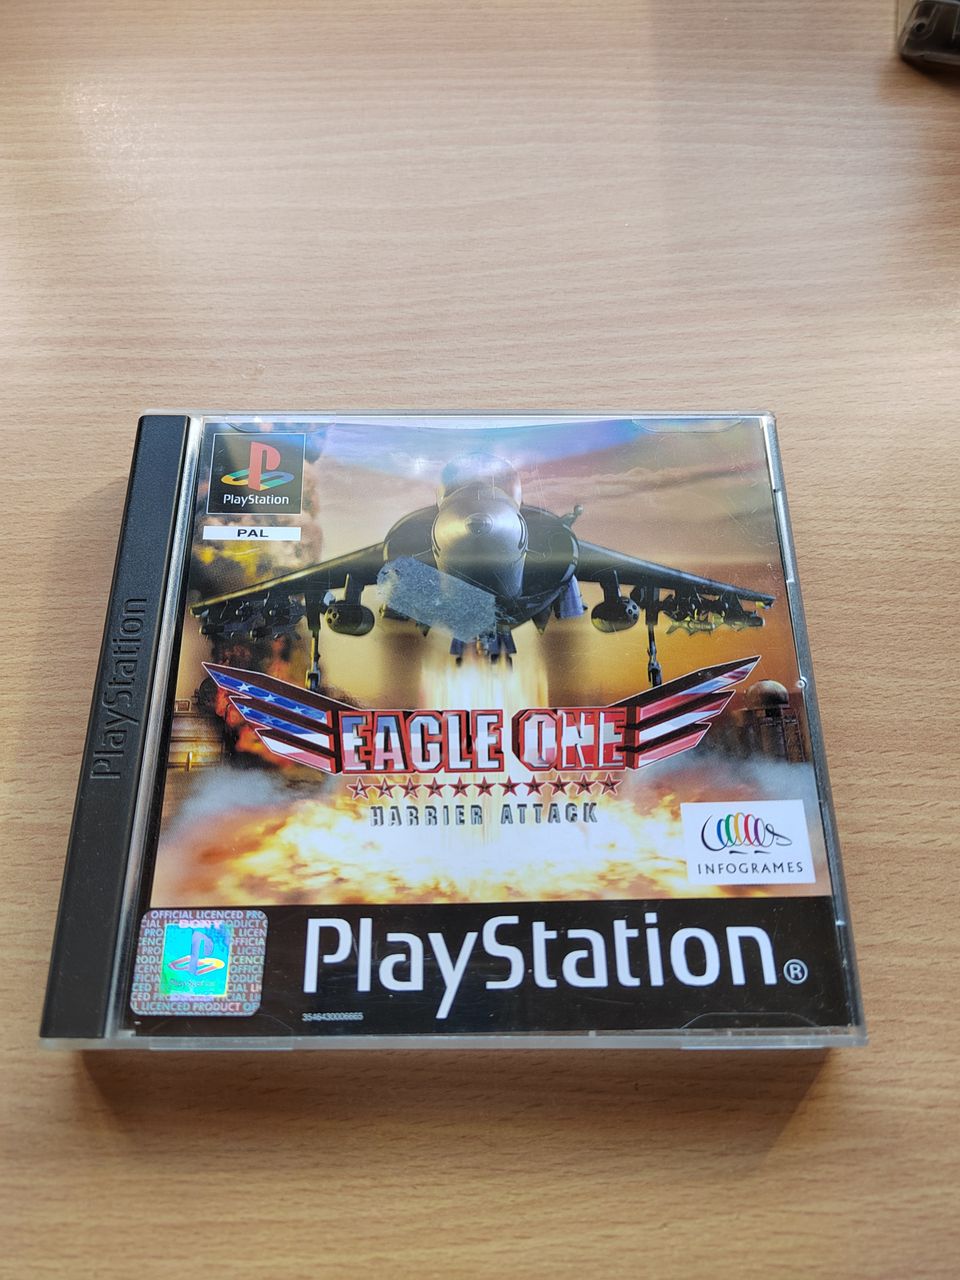 Eagle One - Harrier Attack ps1